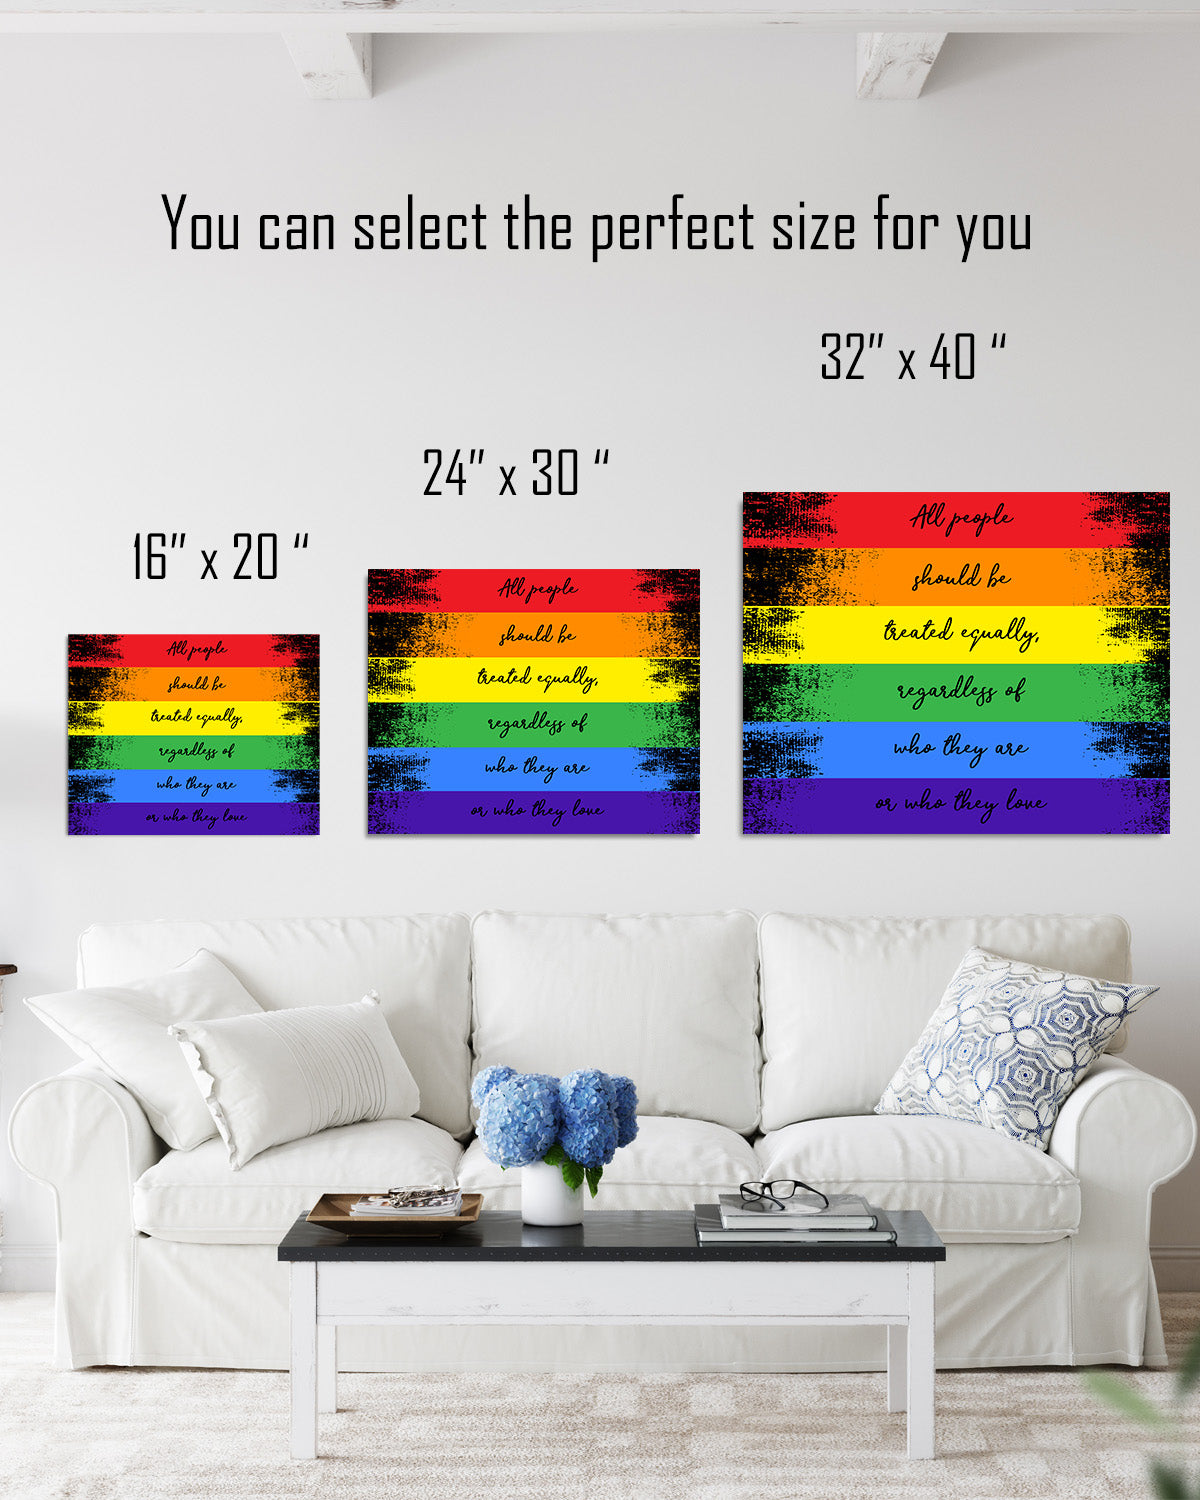 All People Should Be Treated Equally - artwork printed on canvas inspired by the LGBTQ community - great gift for relatives and friends